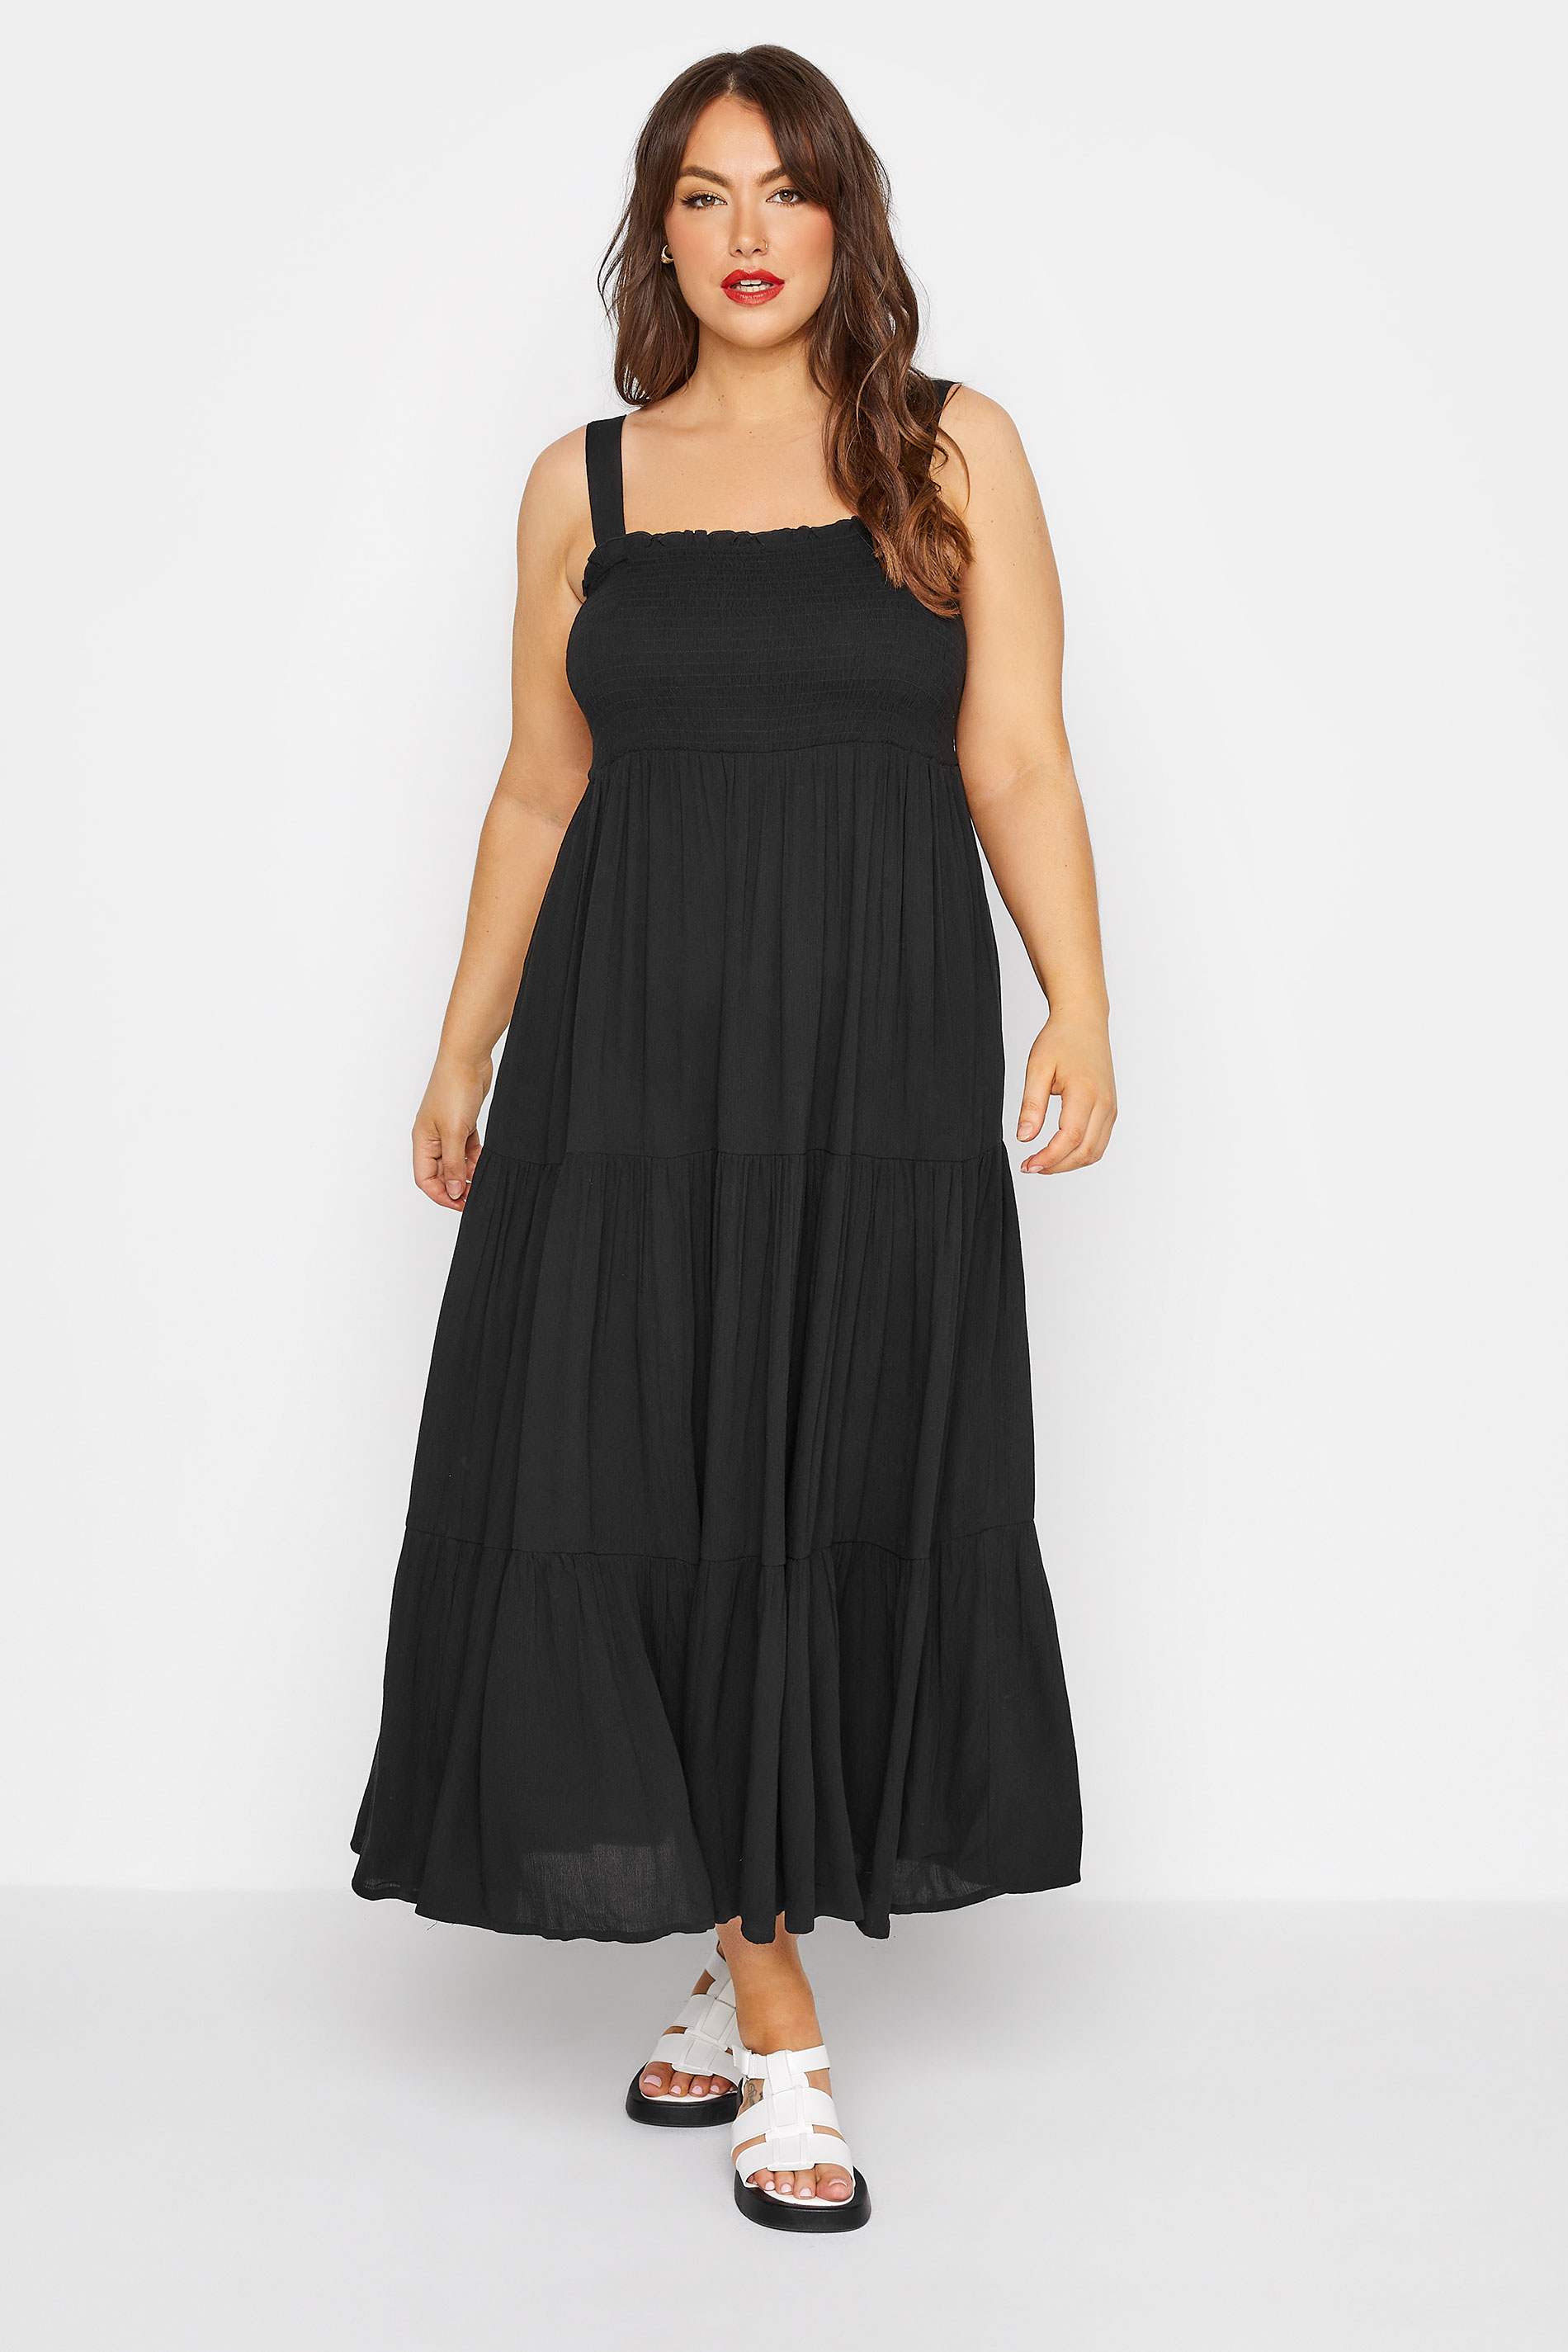 LIMIETD COLLECTION Curve Black Strappy Shirred Tier Dress_A.jpg